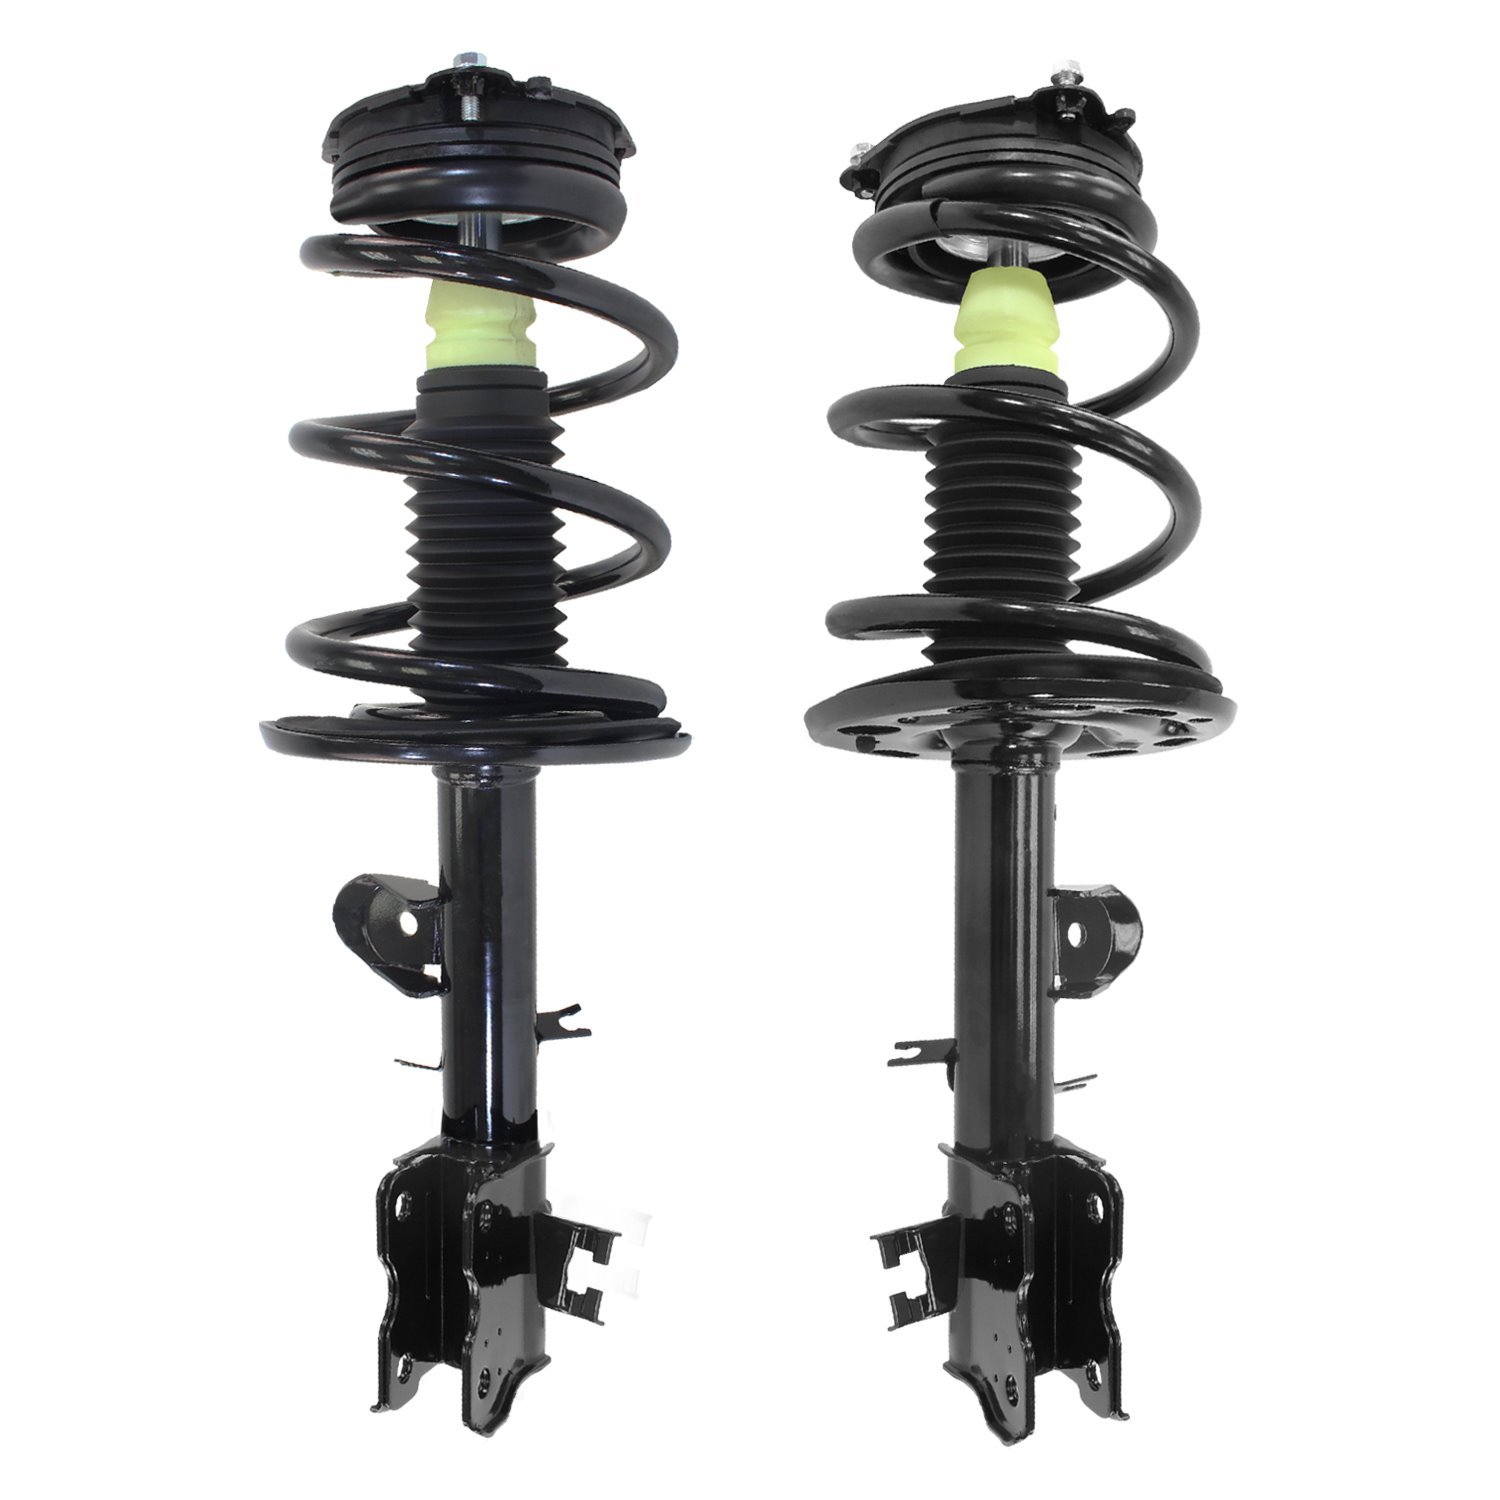 2-13651-13652-001 Front Suspension Strut & Coil Spring Assemby Set Fits Select Infiniti/Nissan